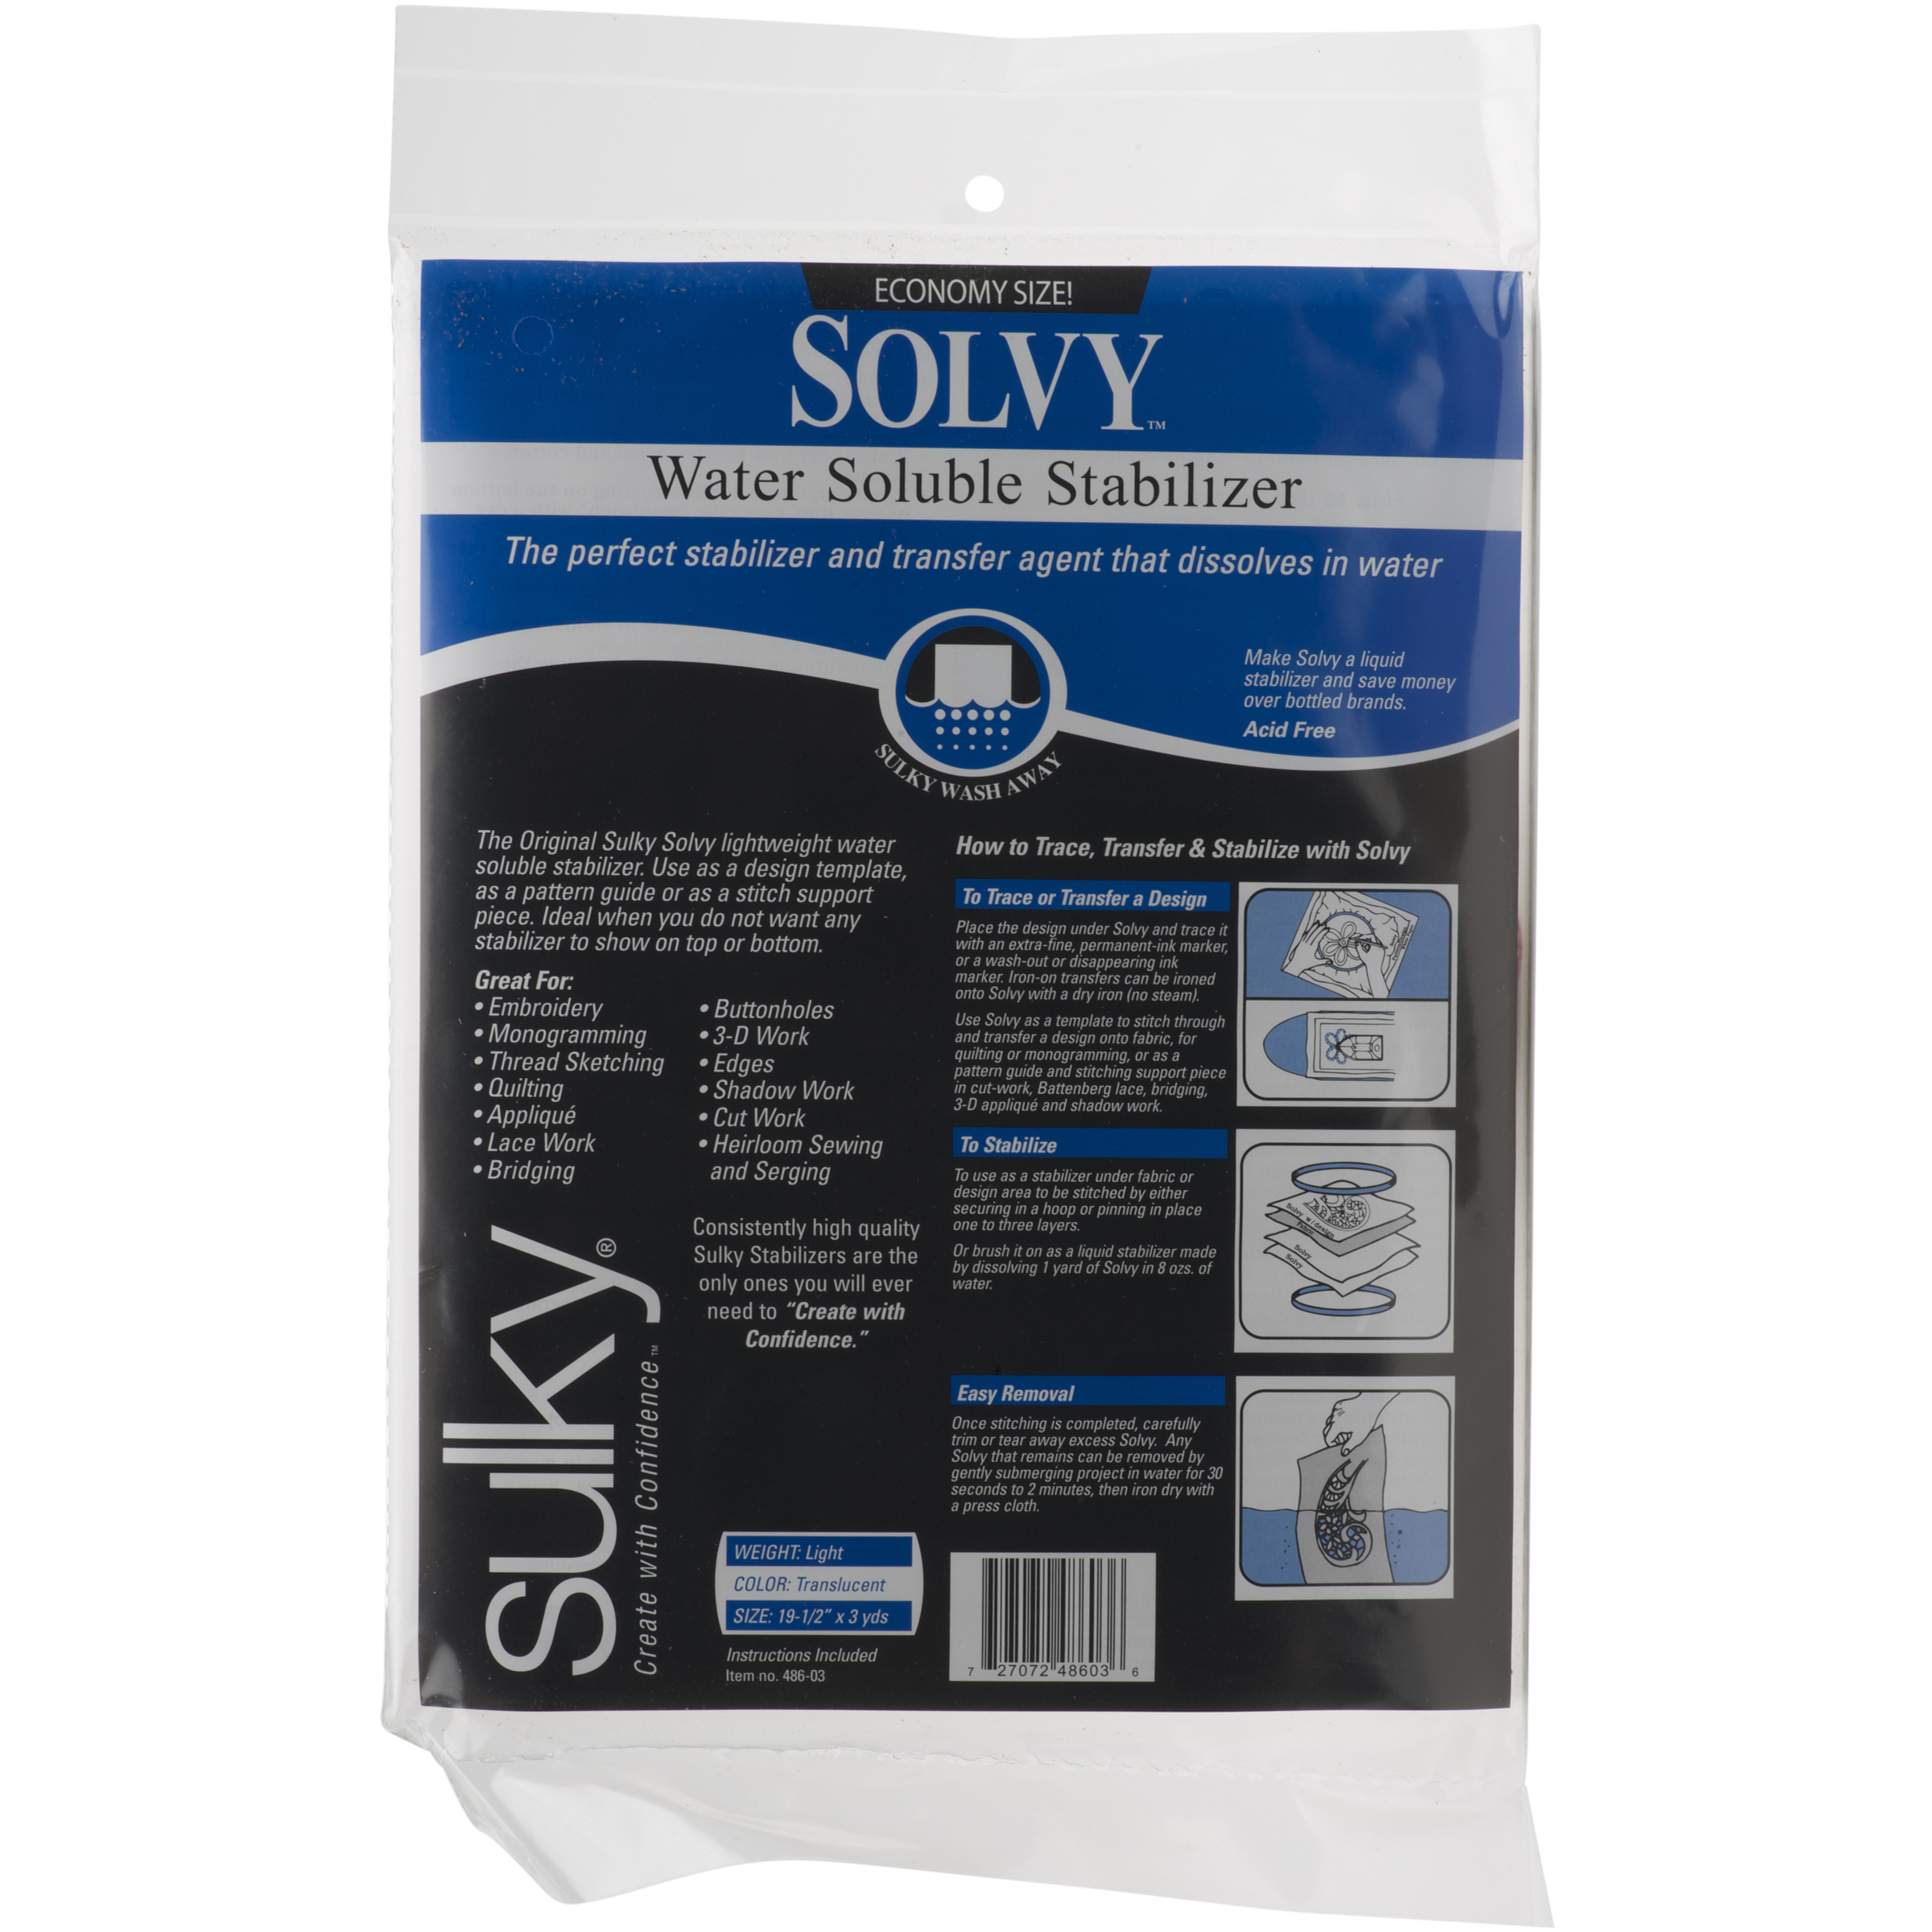 How eco friendly are Solvy Stabilizer products?  I see they're non-toxic, but do they create microplastics?